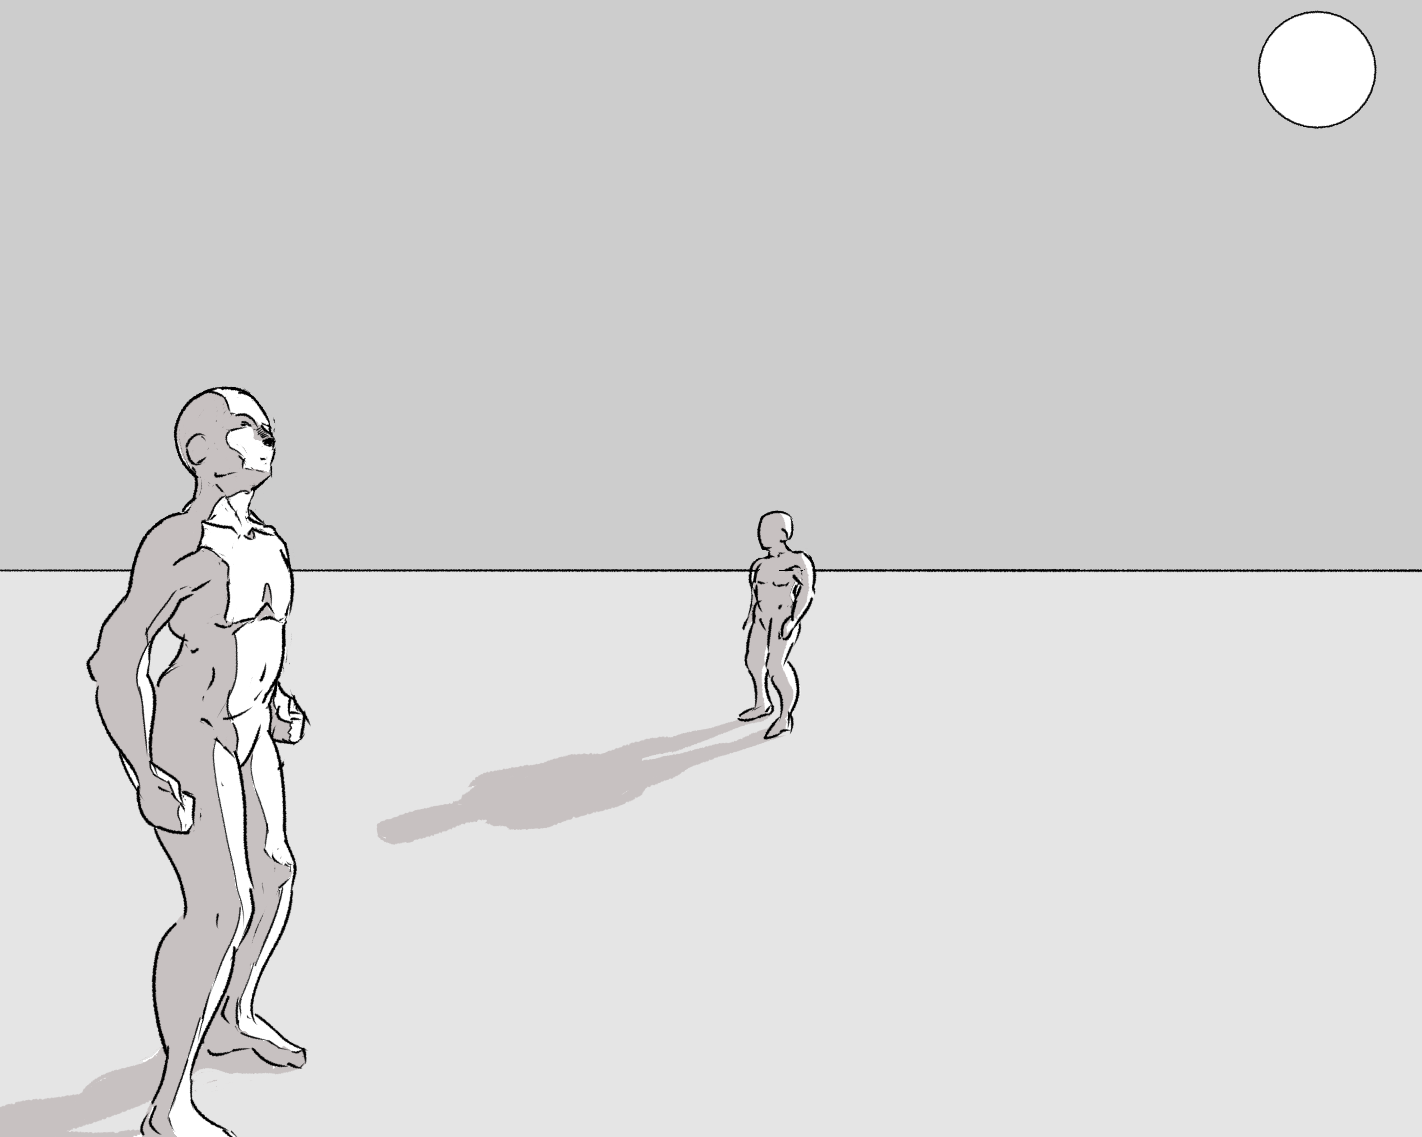 The figures hanging out in a featureless grey void, with shadows cast by the sun.